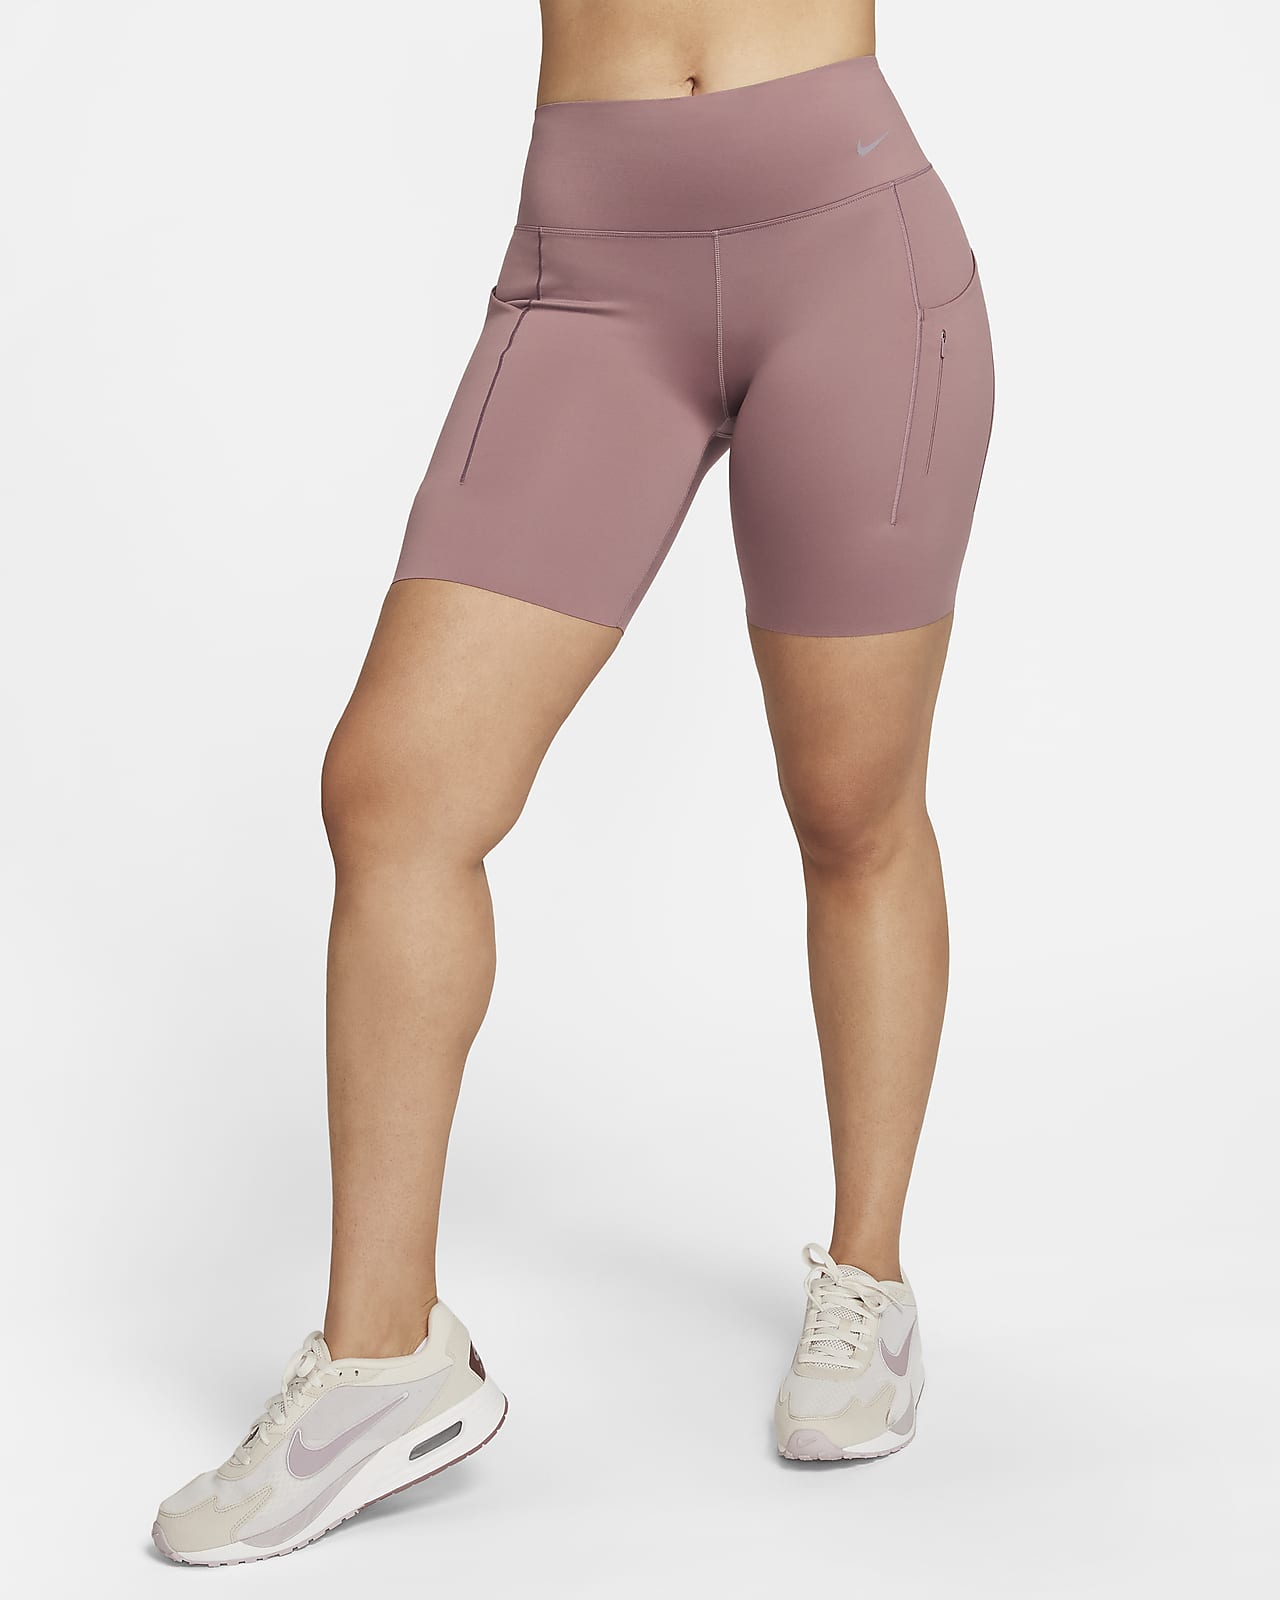 The Best Biker Shorts from lululemon 2023 (with Size Guide